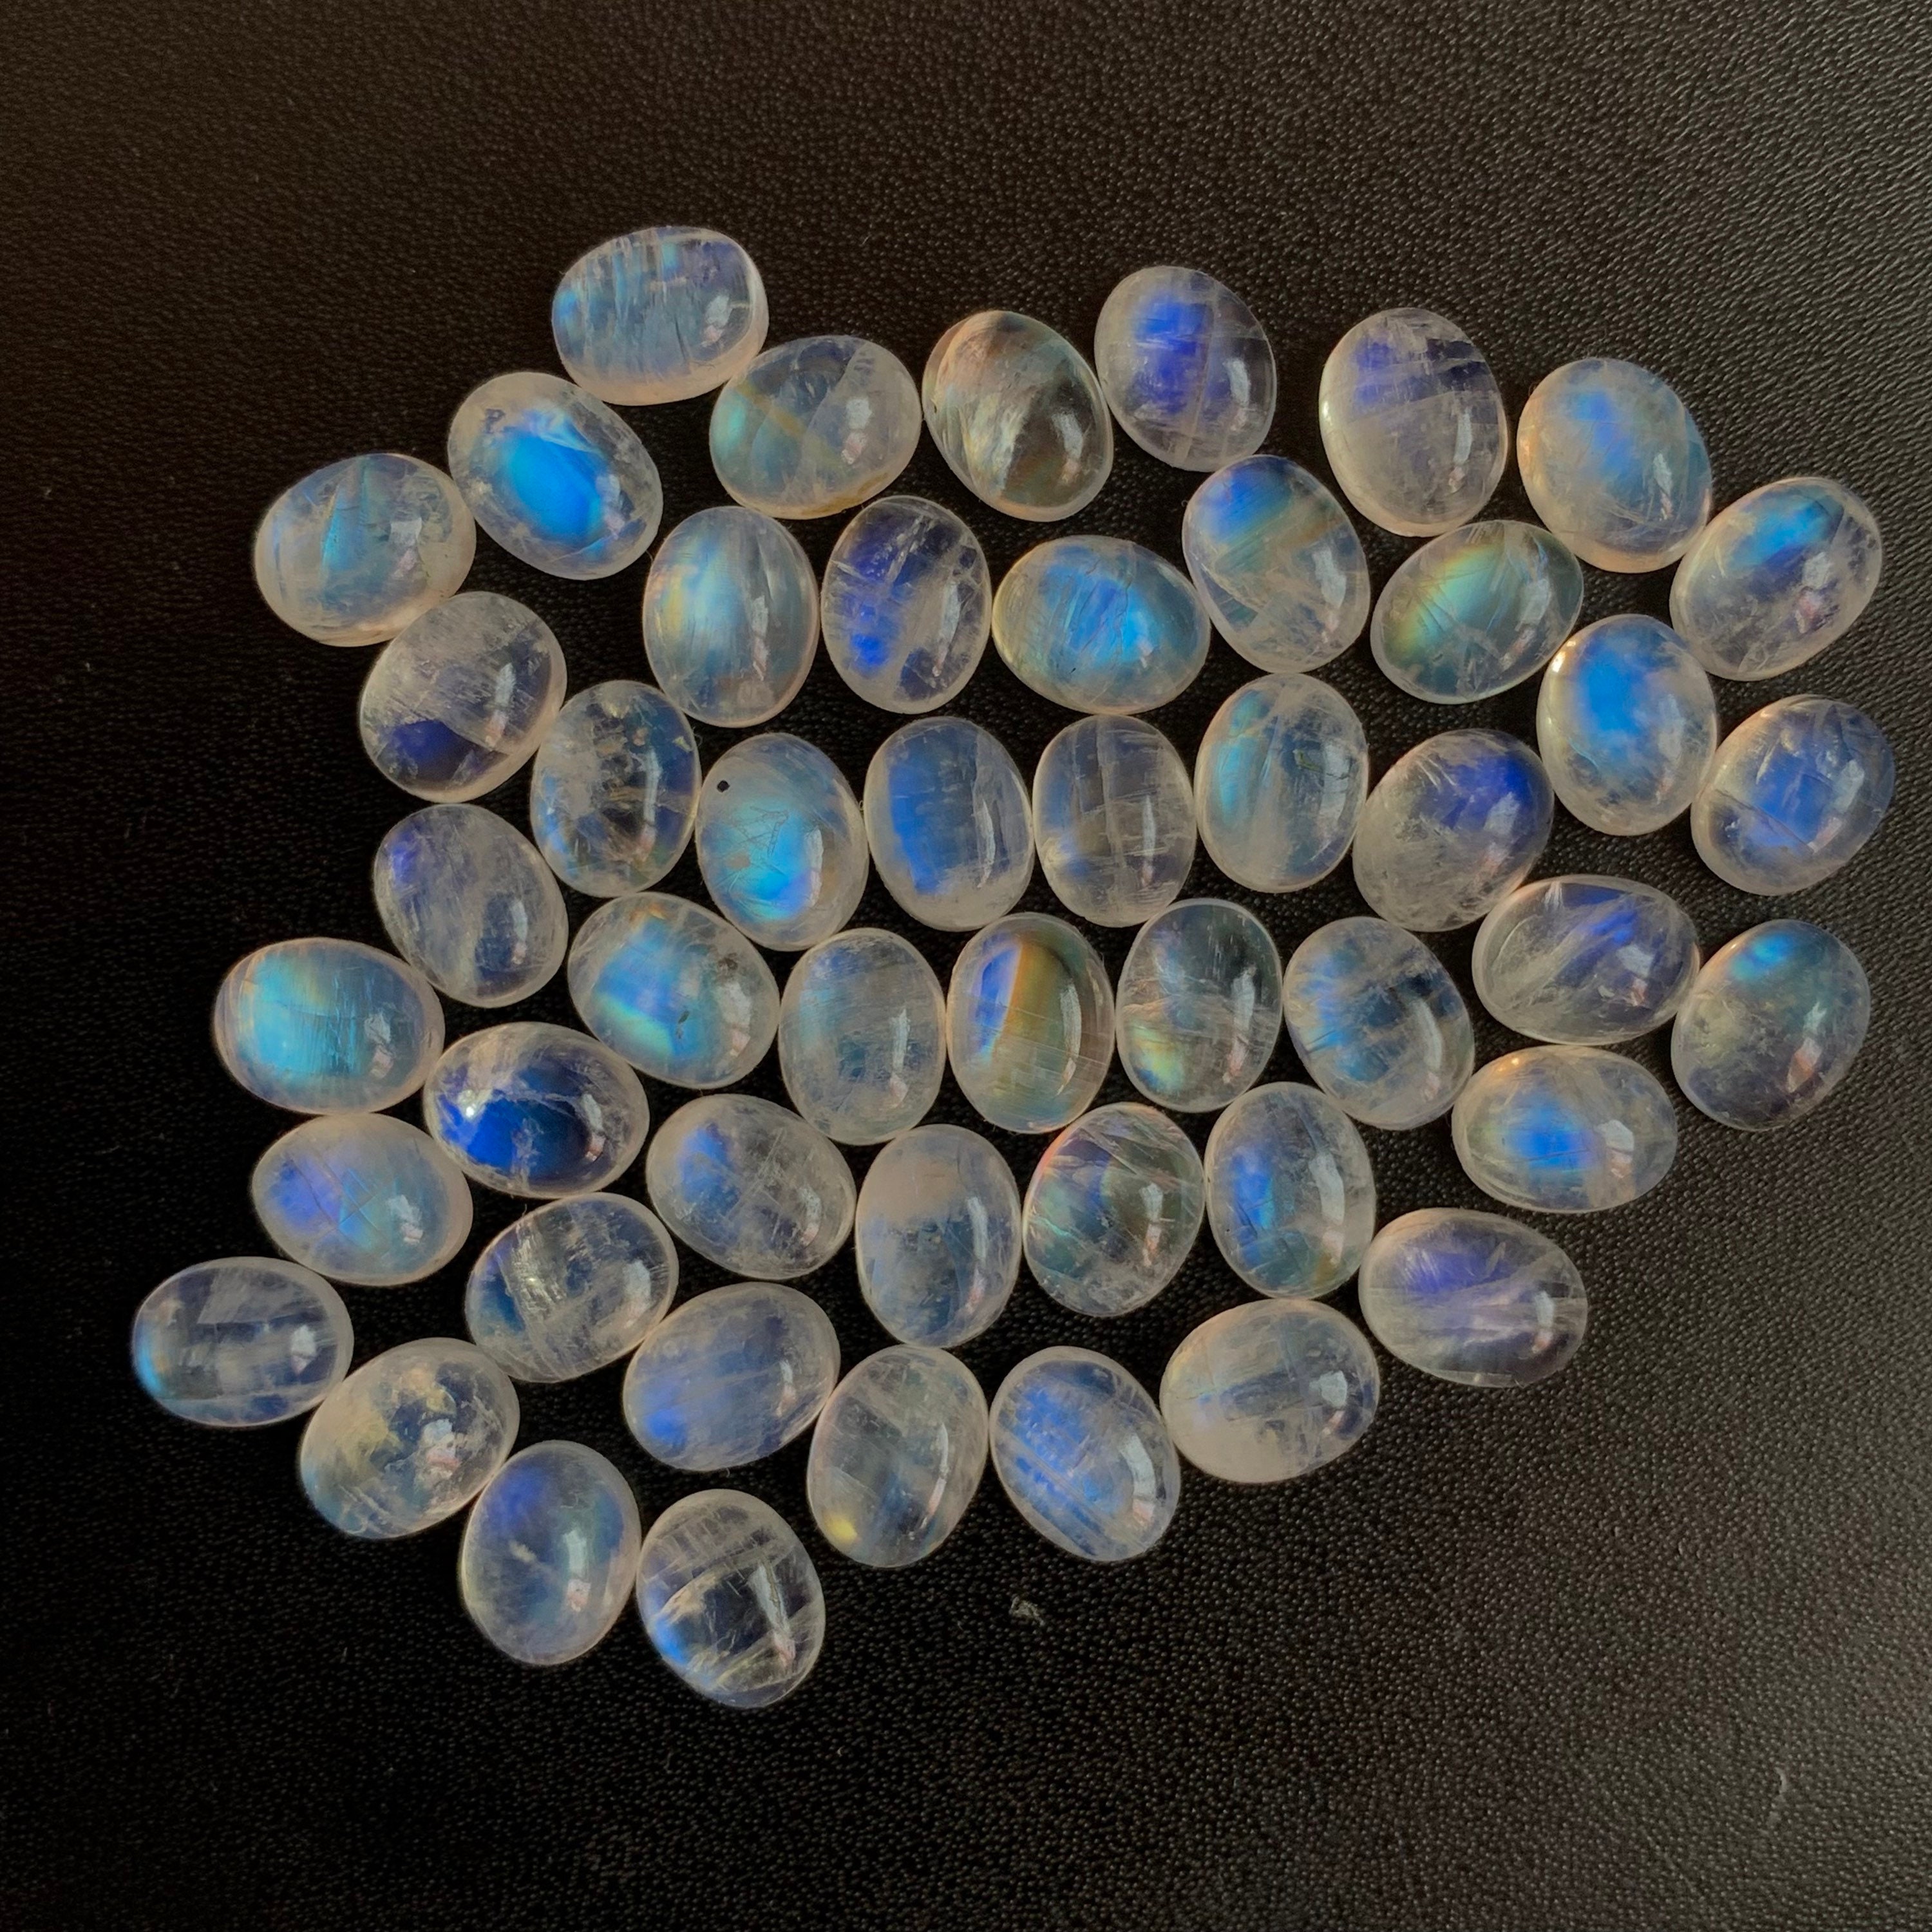 Great Lot of Natural Rainbow Moonstone 7x9 mm Octagon Faceted Cut Loose Gemstone 